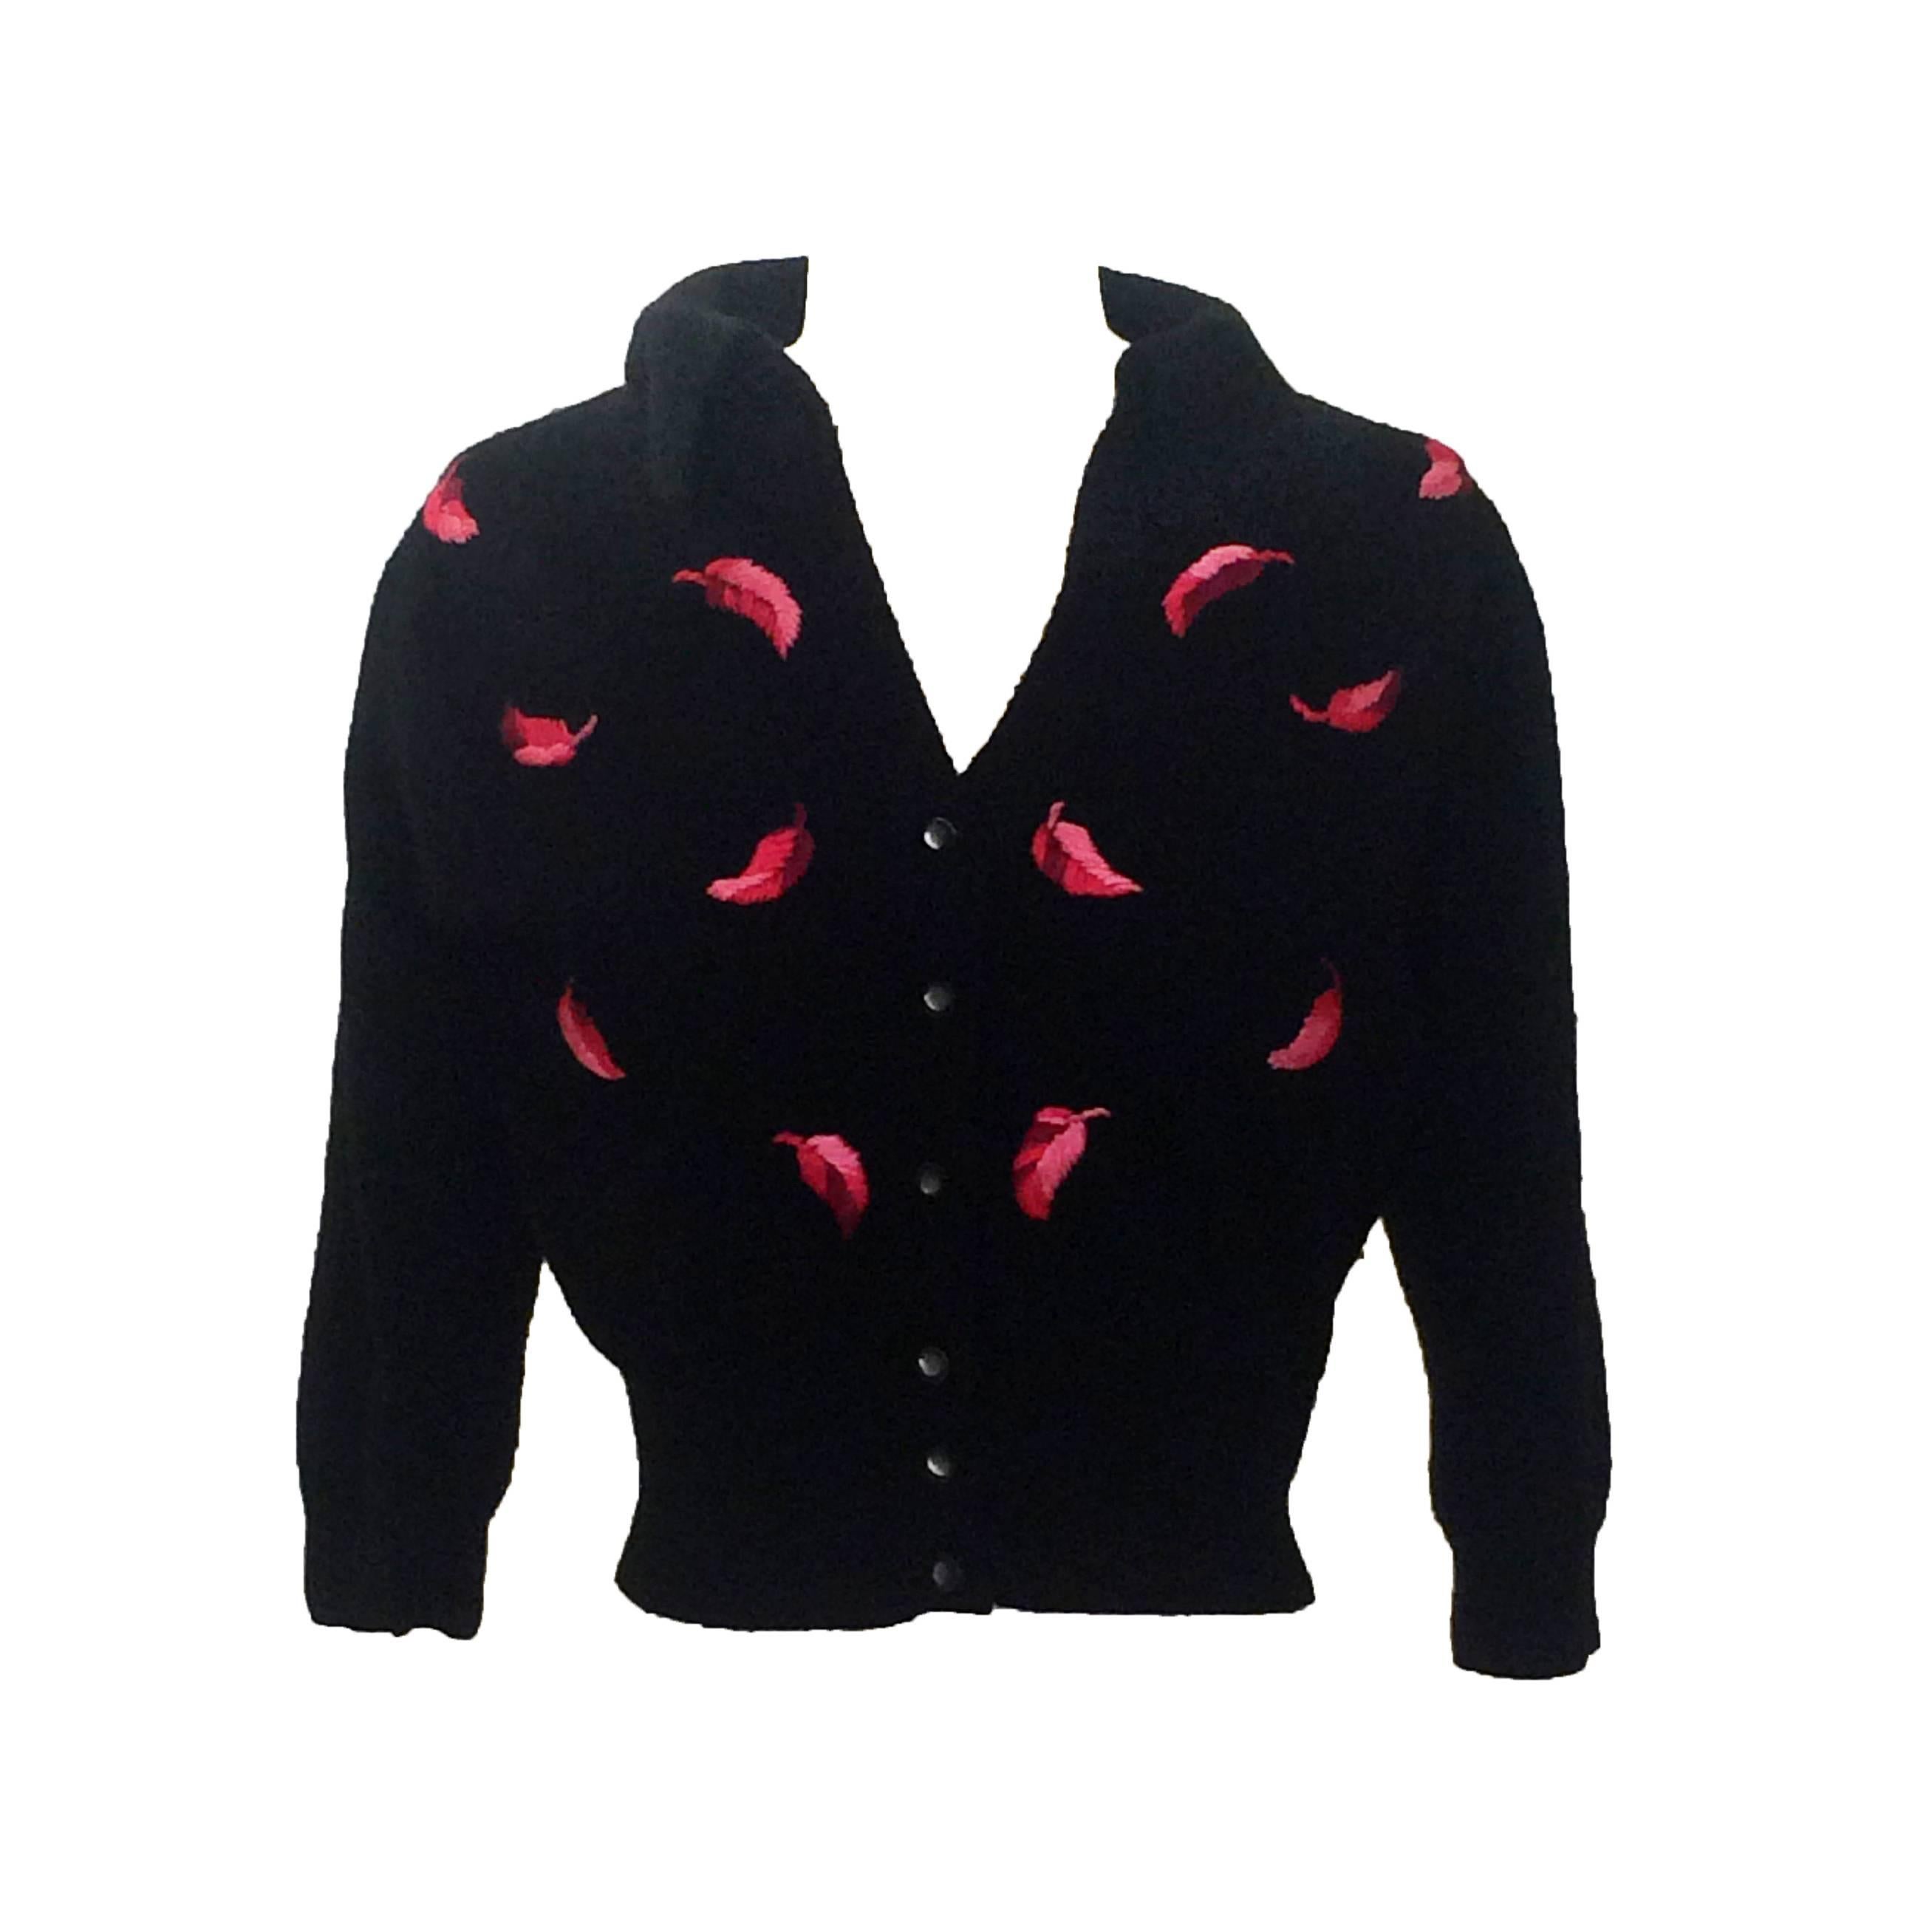 Schiaparelli 60s Black Collared Cardigan Sweater with Pink Feather Applique